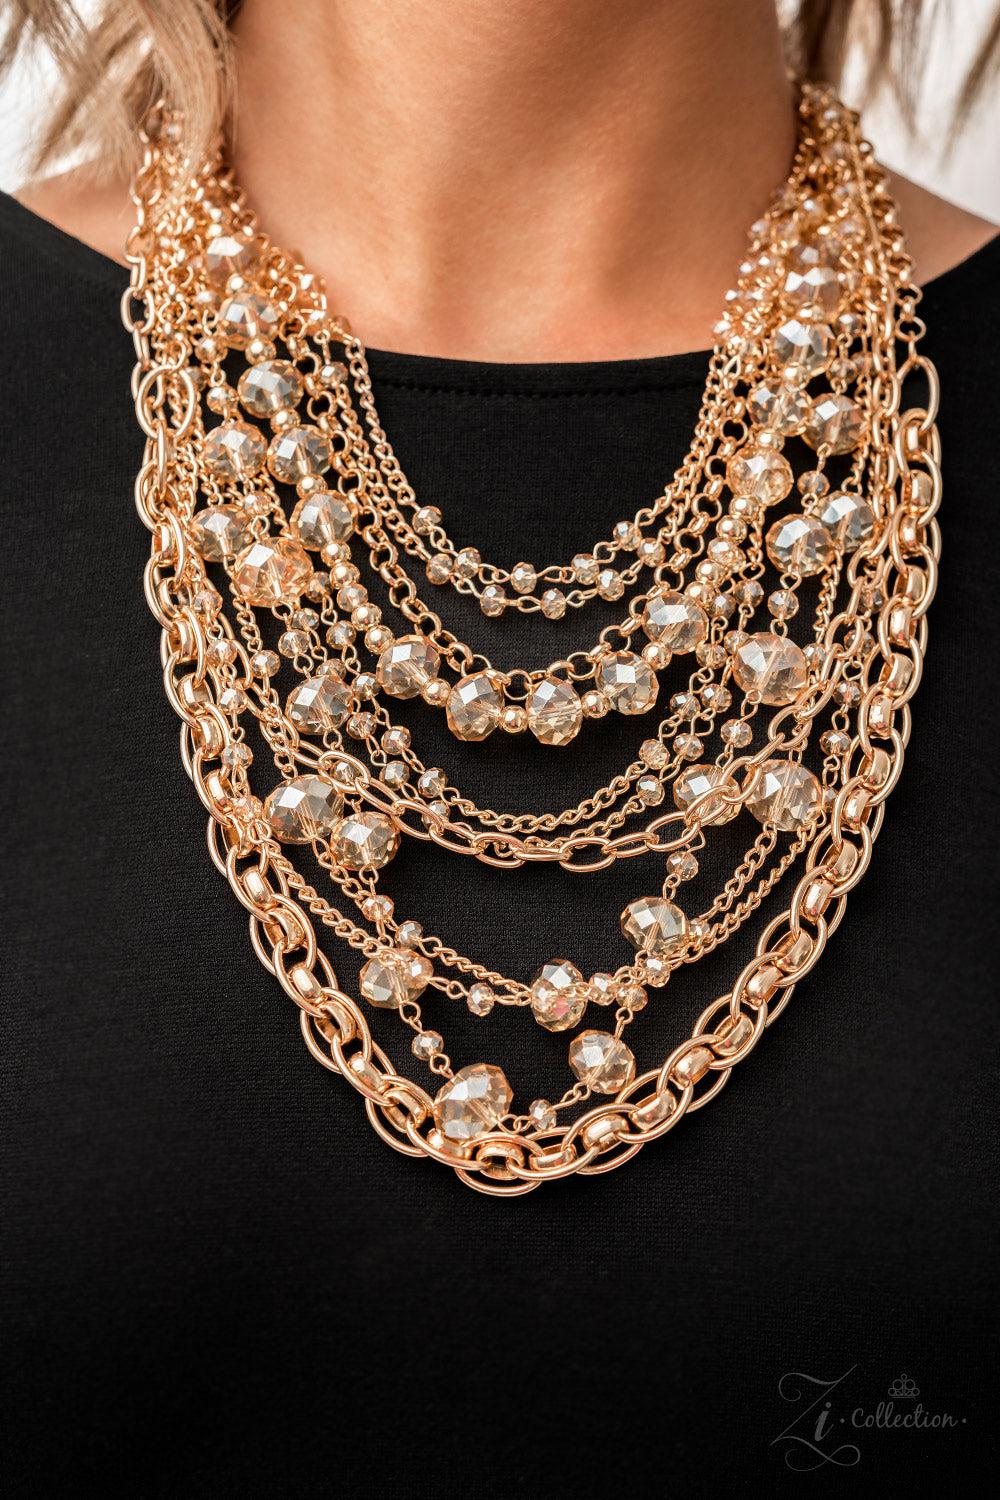 Reminiscent 2022 Zi Collection Necklace - Paparazzi Accessories-on model - CarasShop.com - $5 Jewelry by Cara Jewels